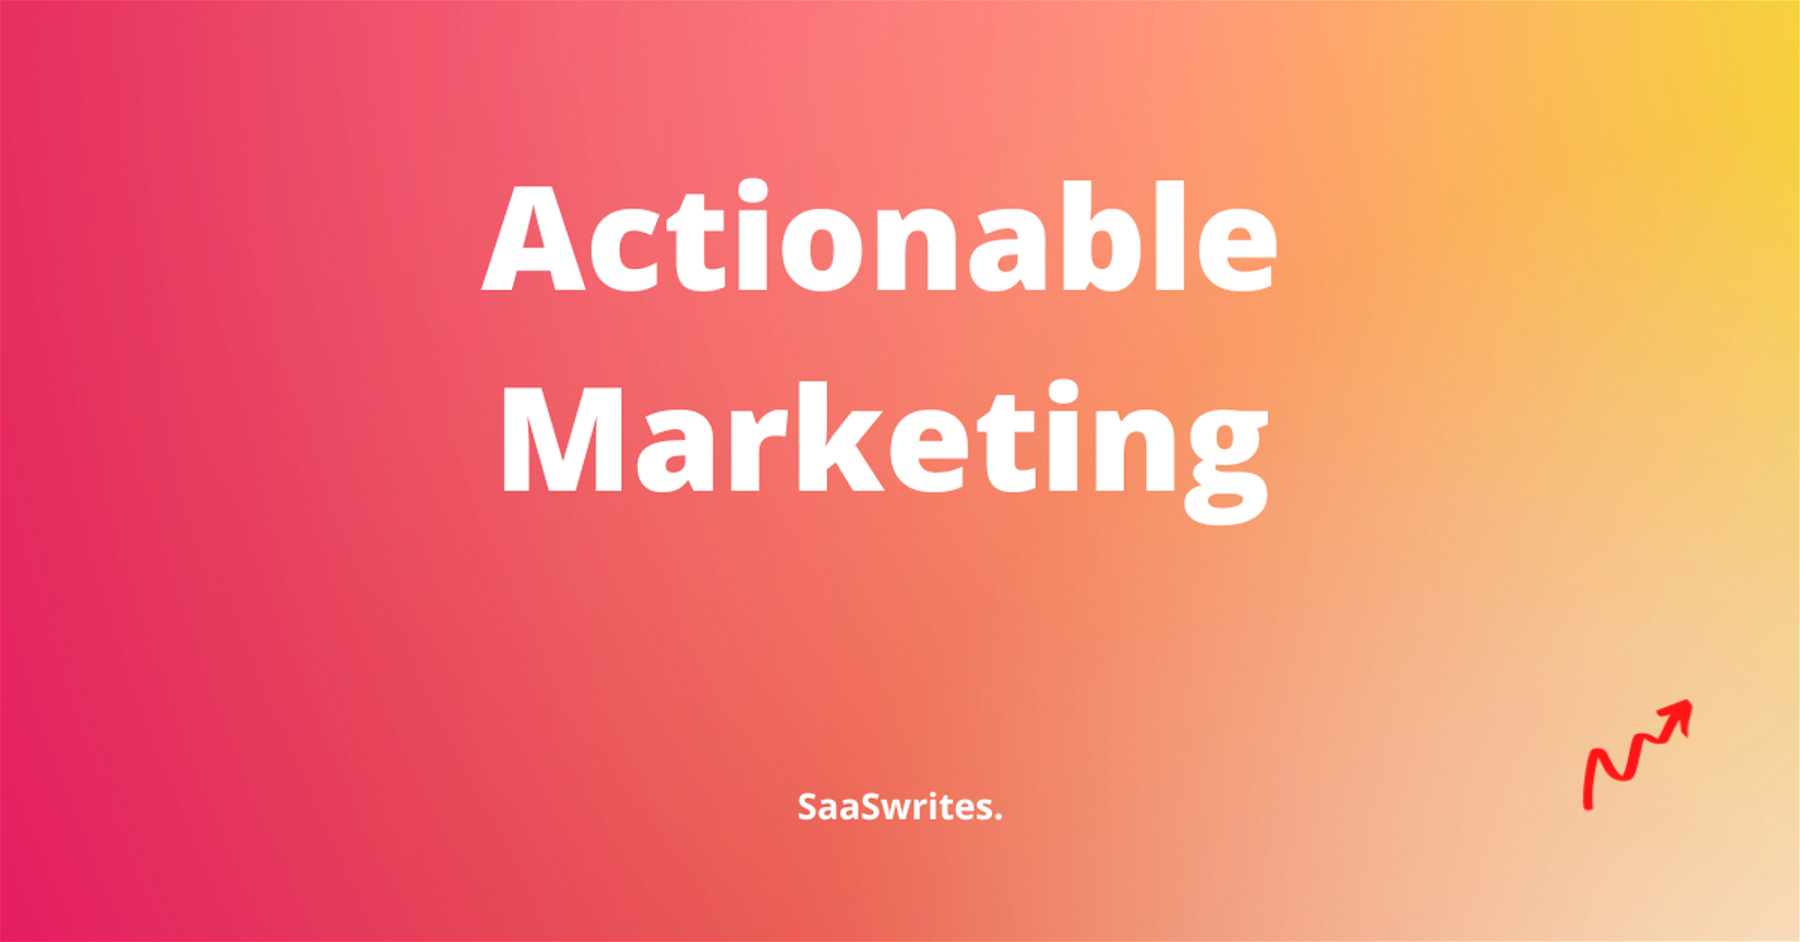 Actionable Marketing